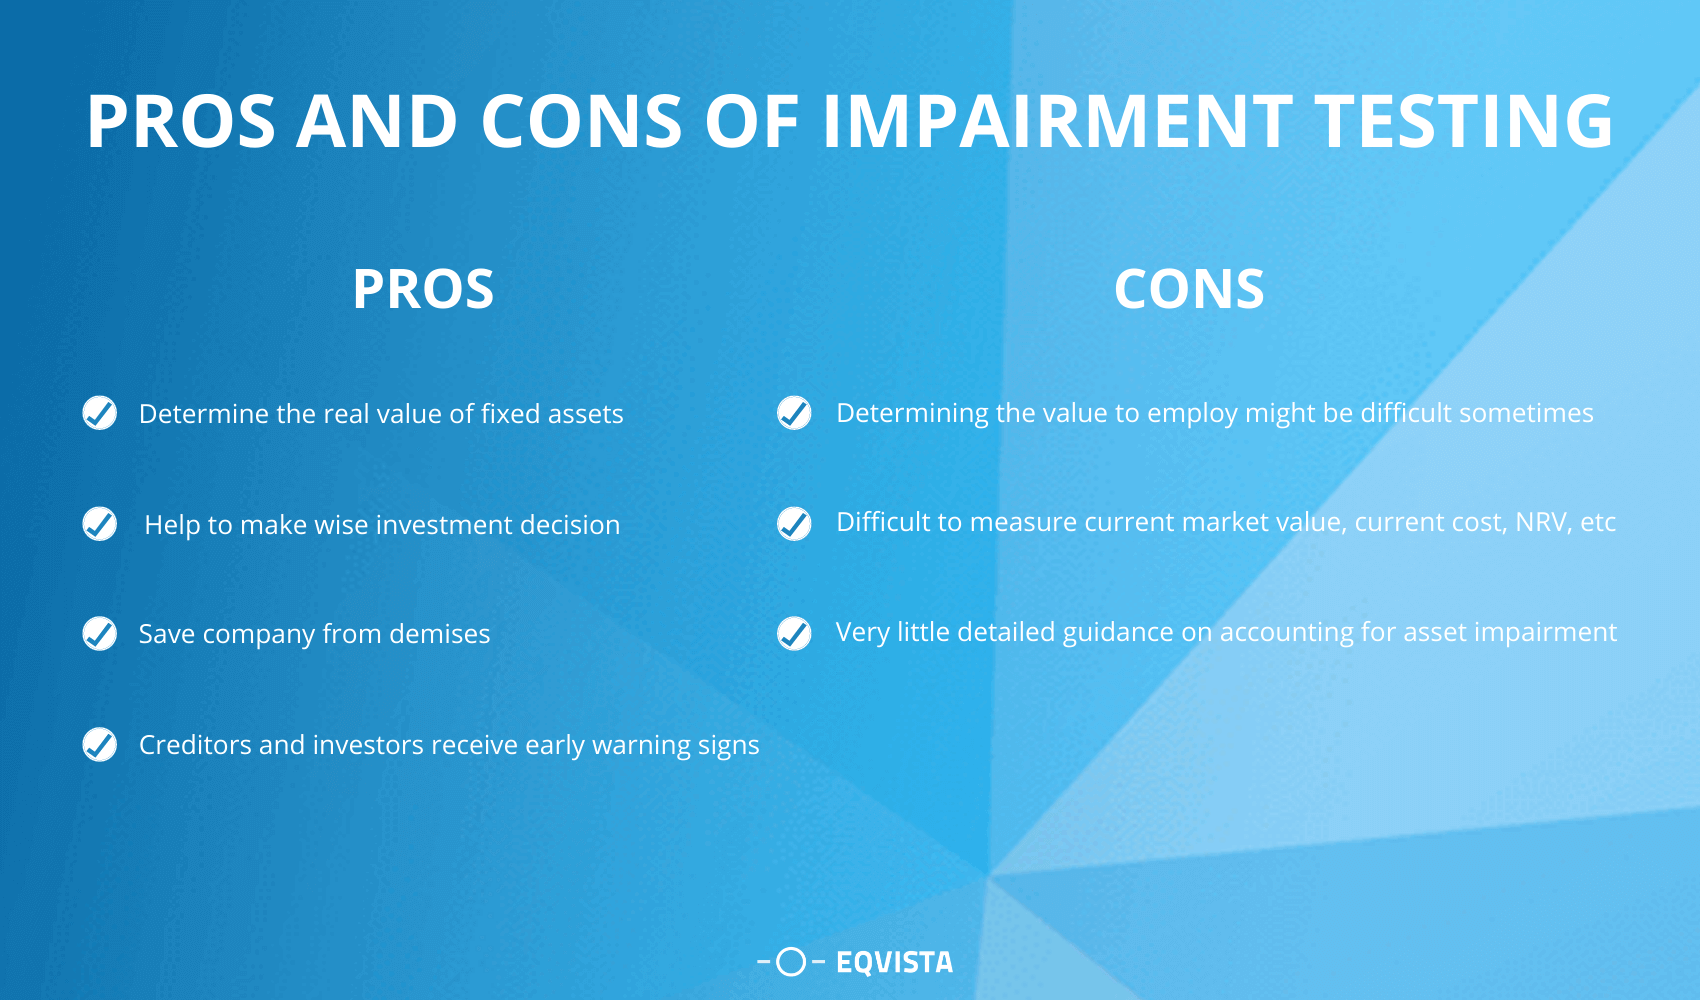 Pros and Cons of impairment testing